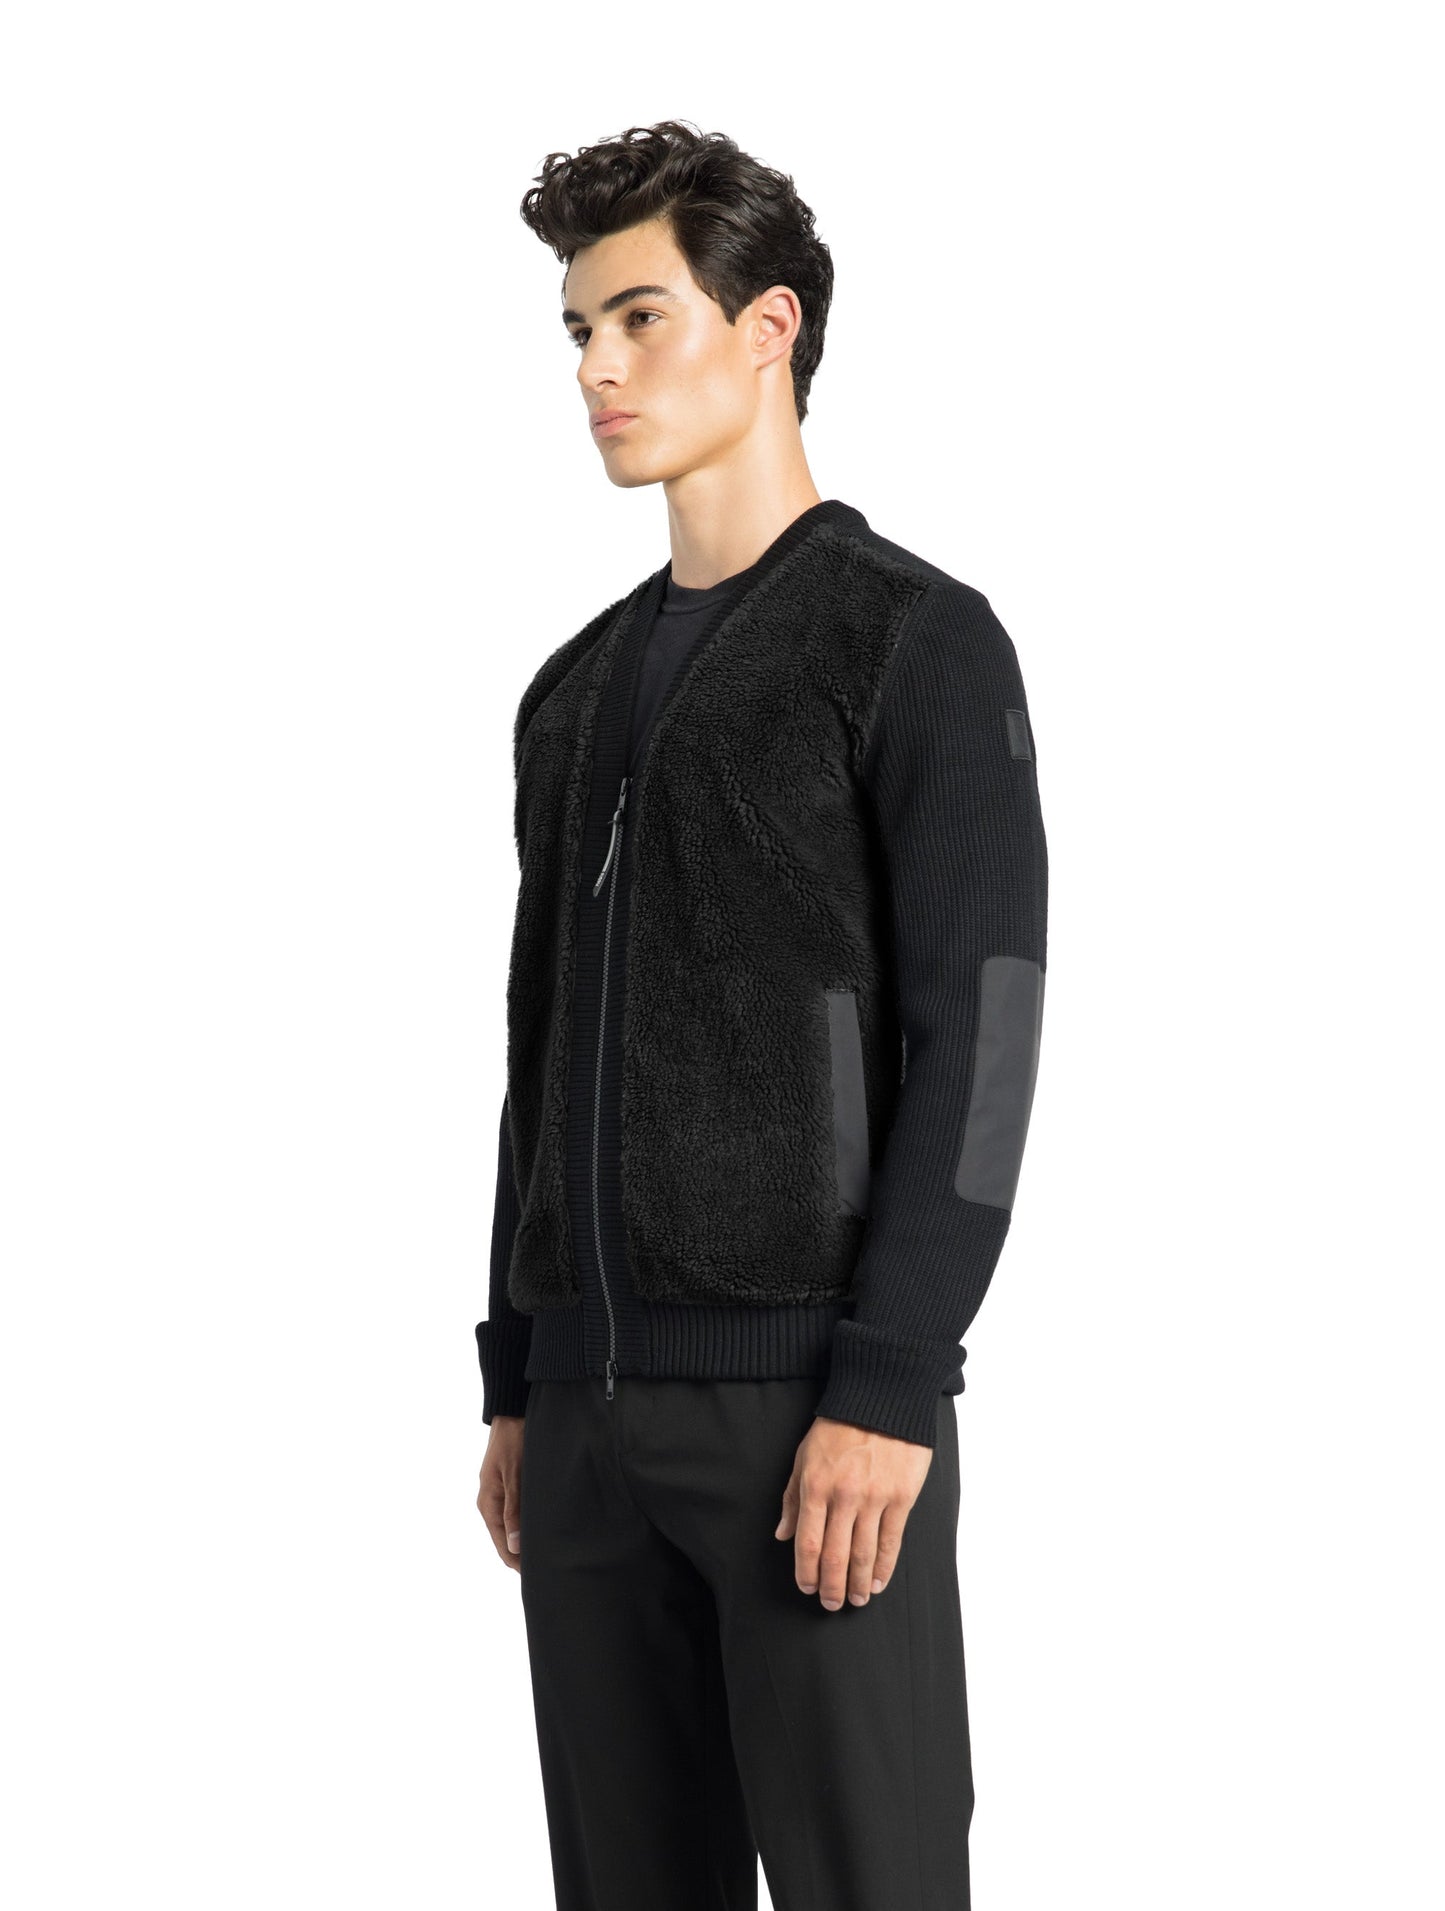 Doyen Men's Hybrid Berber V-Neck Jacket in hip length, premium berber and 100% extra fine merino wool knit fabrication, Primaloft Gold Insulation Active+, two-way centre-front zipper, side-entry pockets at waist, in Black